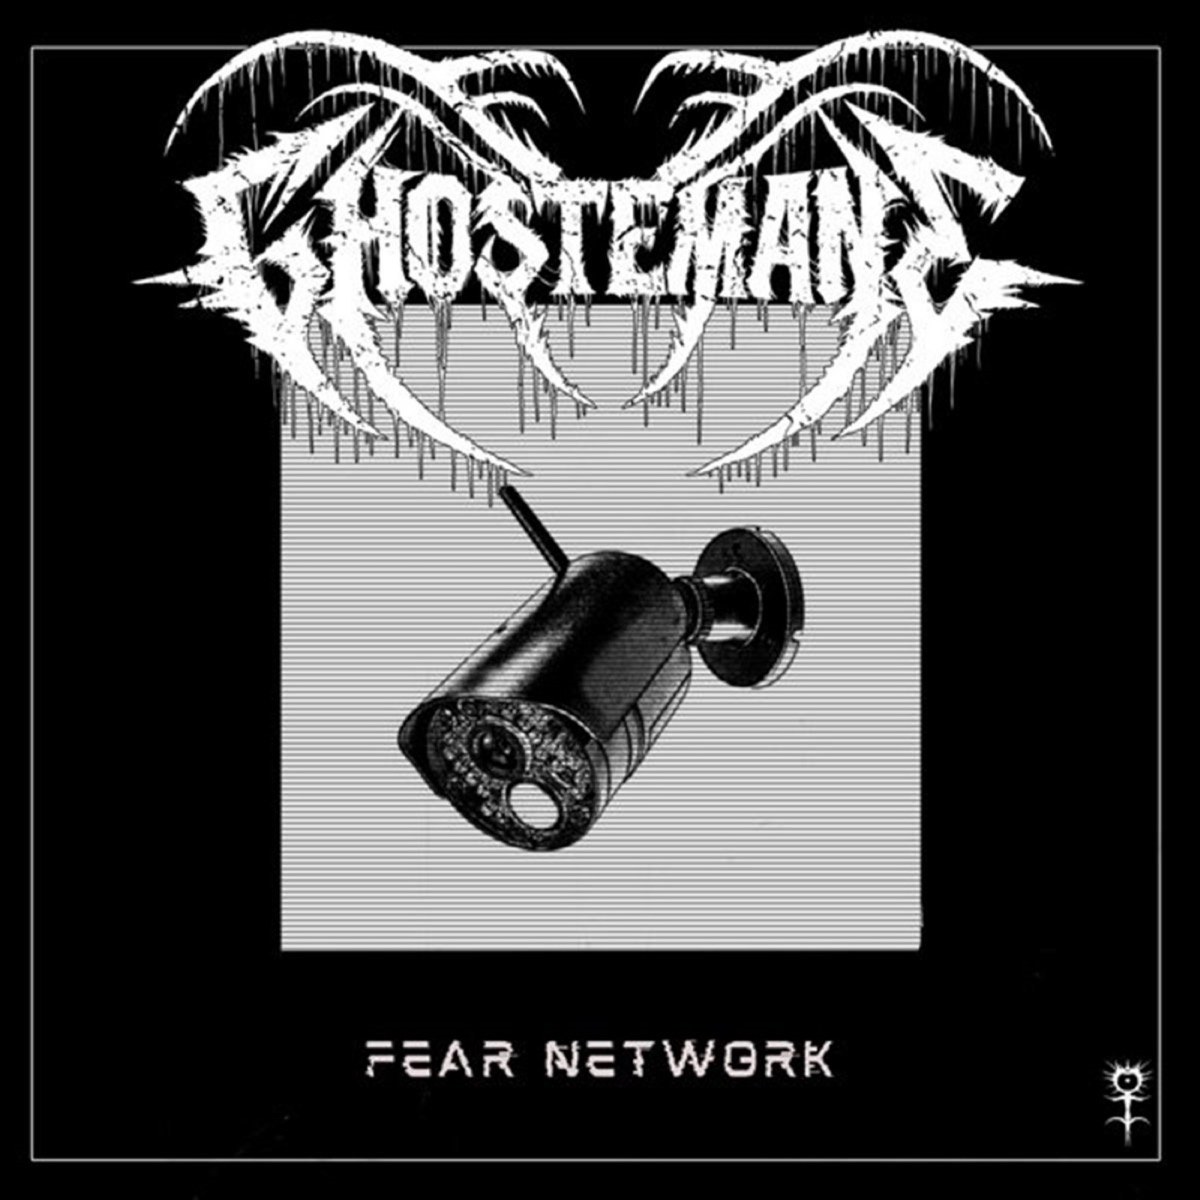 For the Aspiring Occultist - Album by Ghostemane - Apple Music